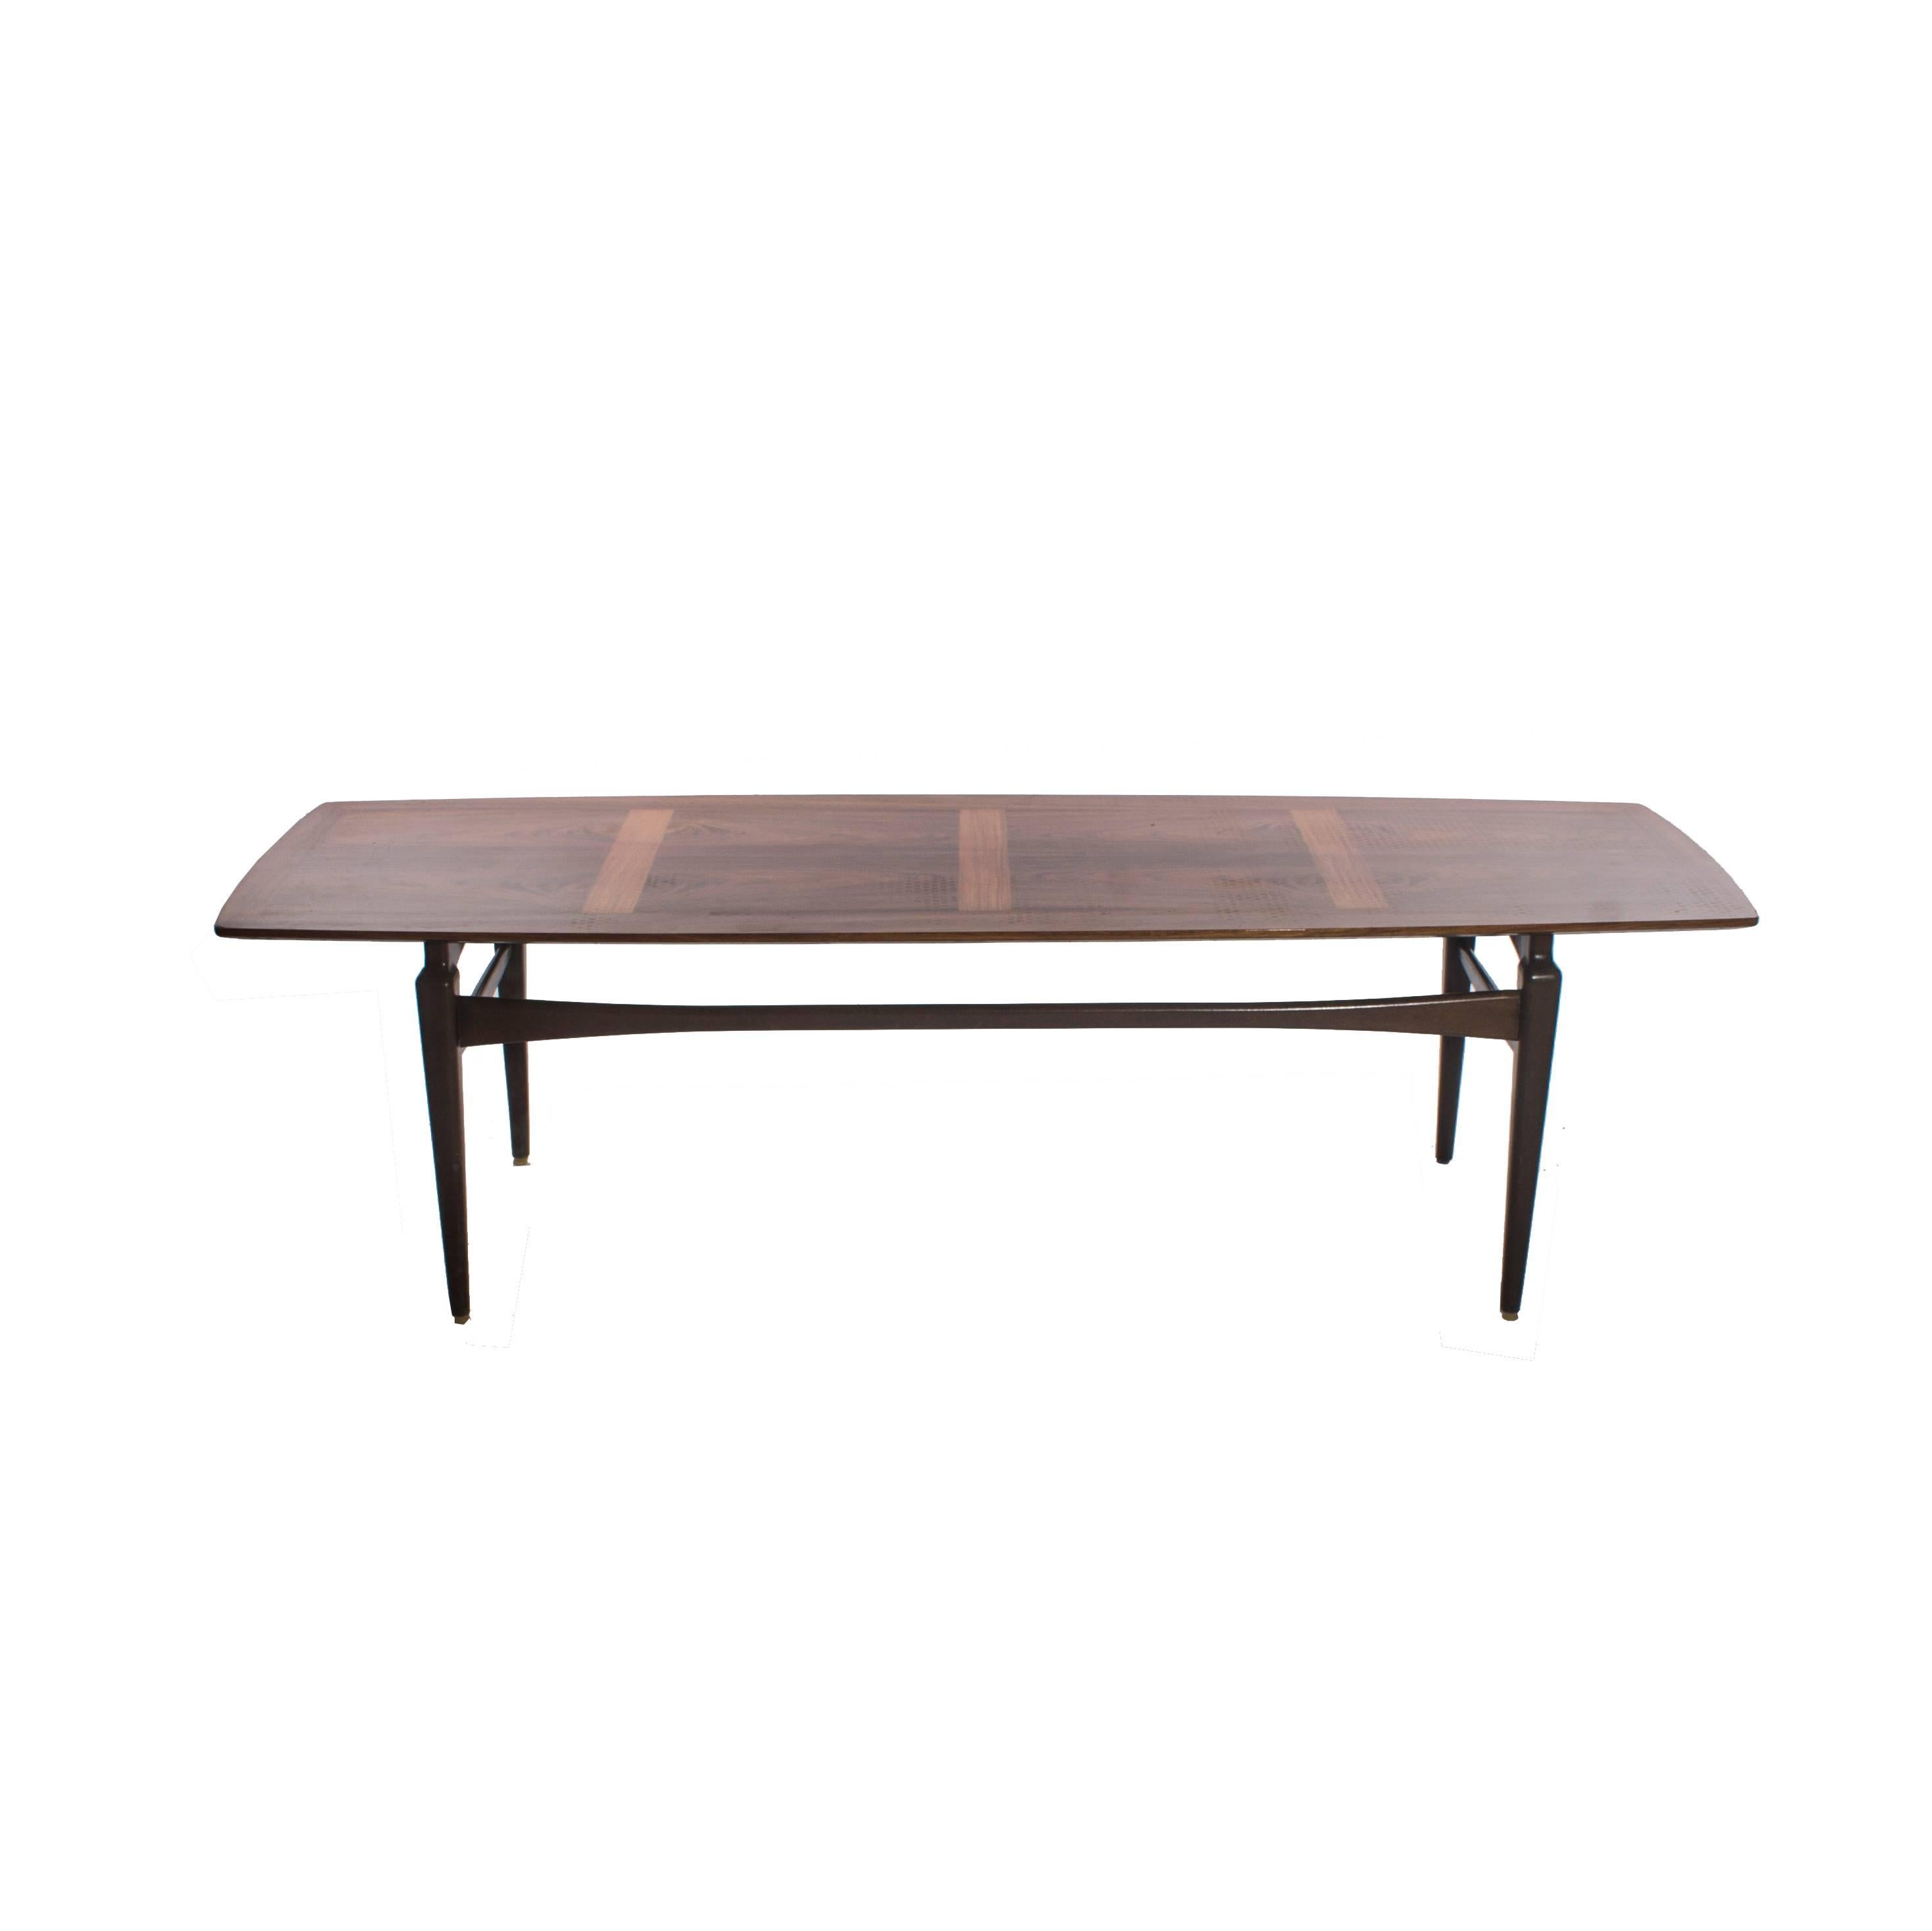 This well-proportioned and unique designed Danish table will add character. Treated with hard wax oil has made the fibers more distinguished.